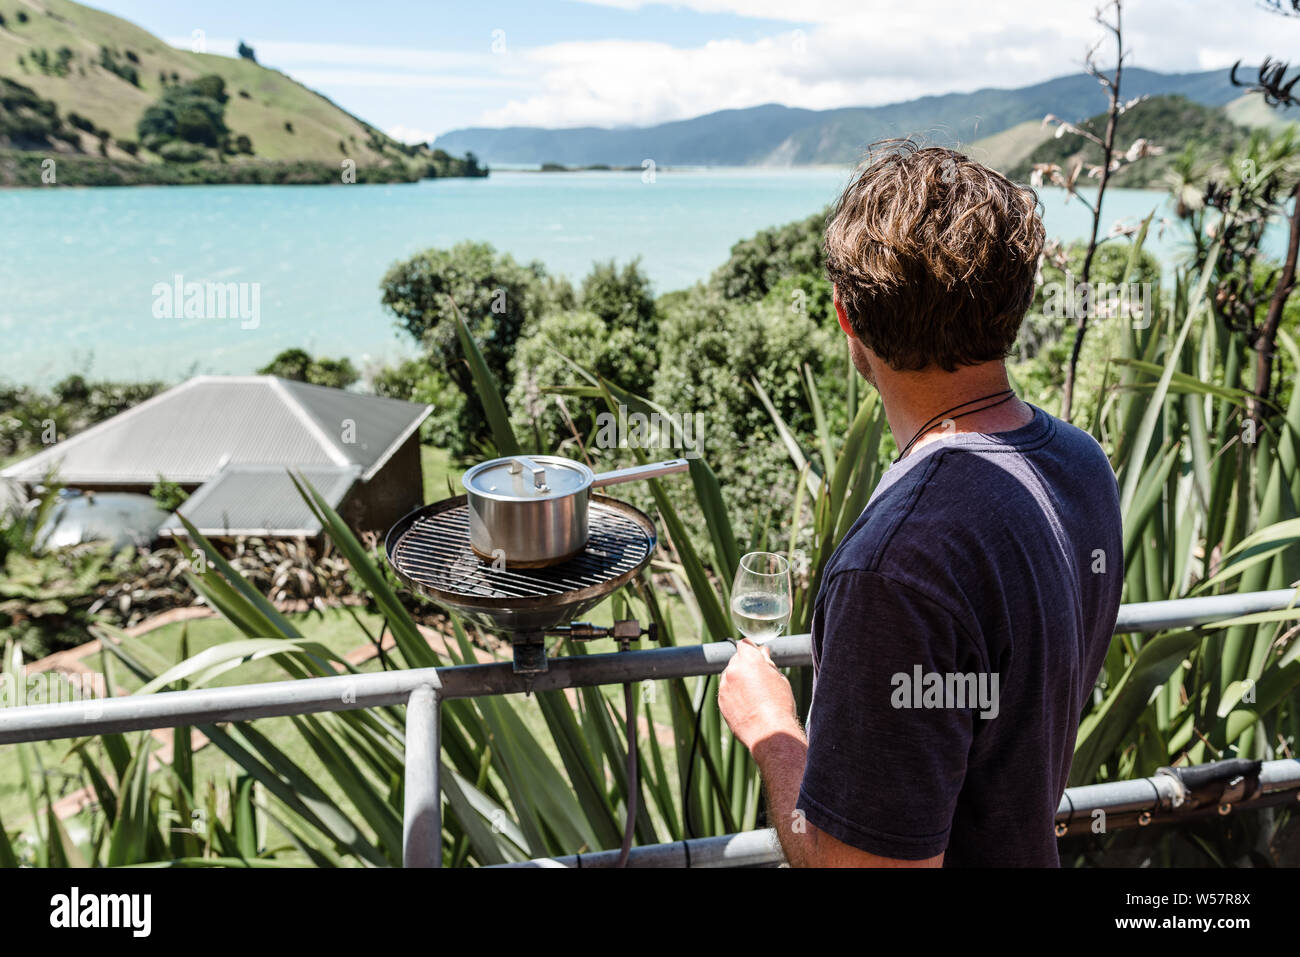 Man cooking outside overlooking beautiful view Stock Photo